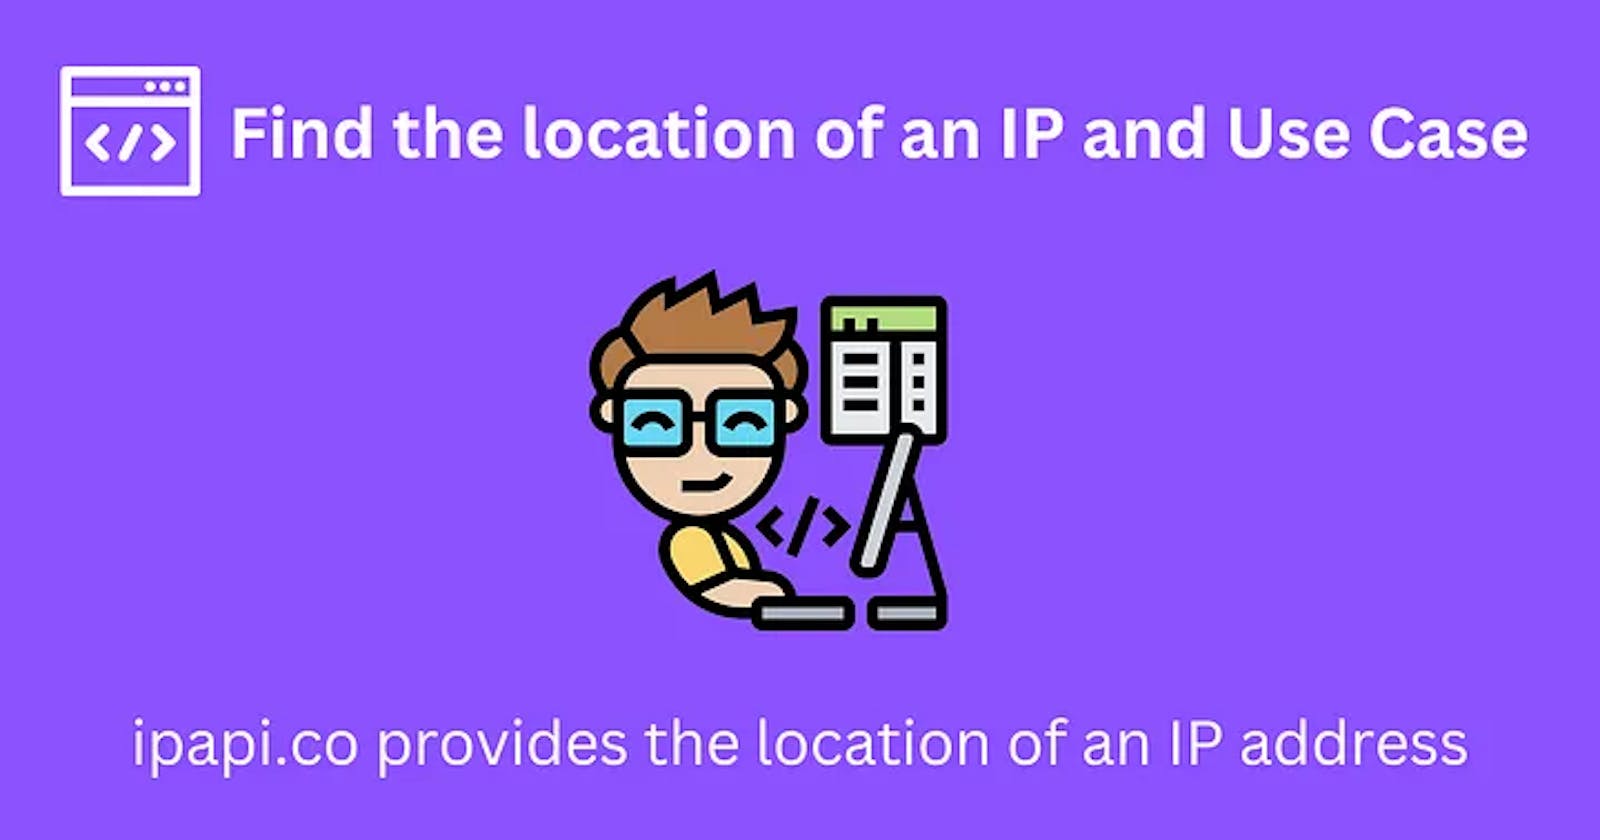 Find the location of an IP and Use Case